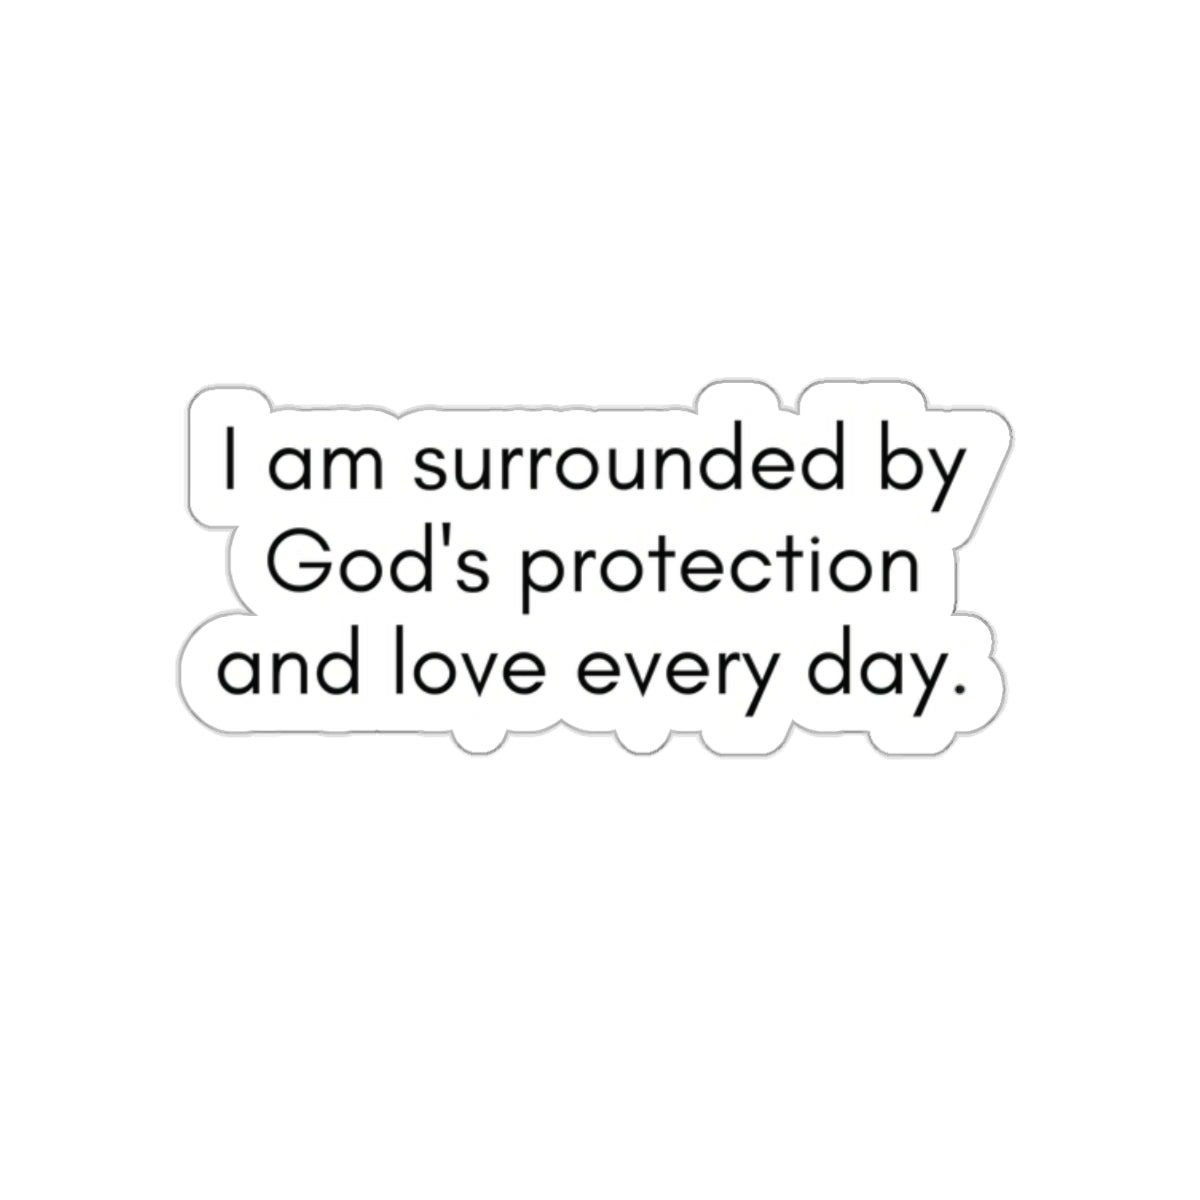 Surrounded By God's Protection Inspirational Quote Kiss-Cut Stickers-Paper products-2" × 2"-White-mysticalcherry